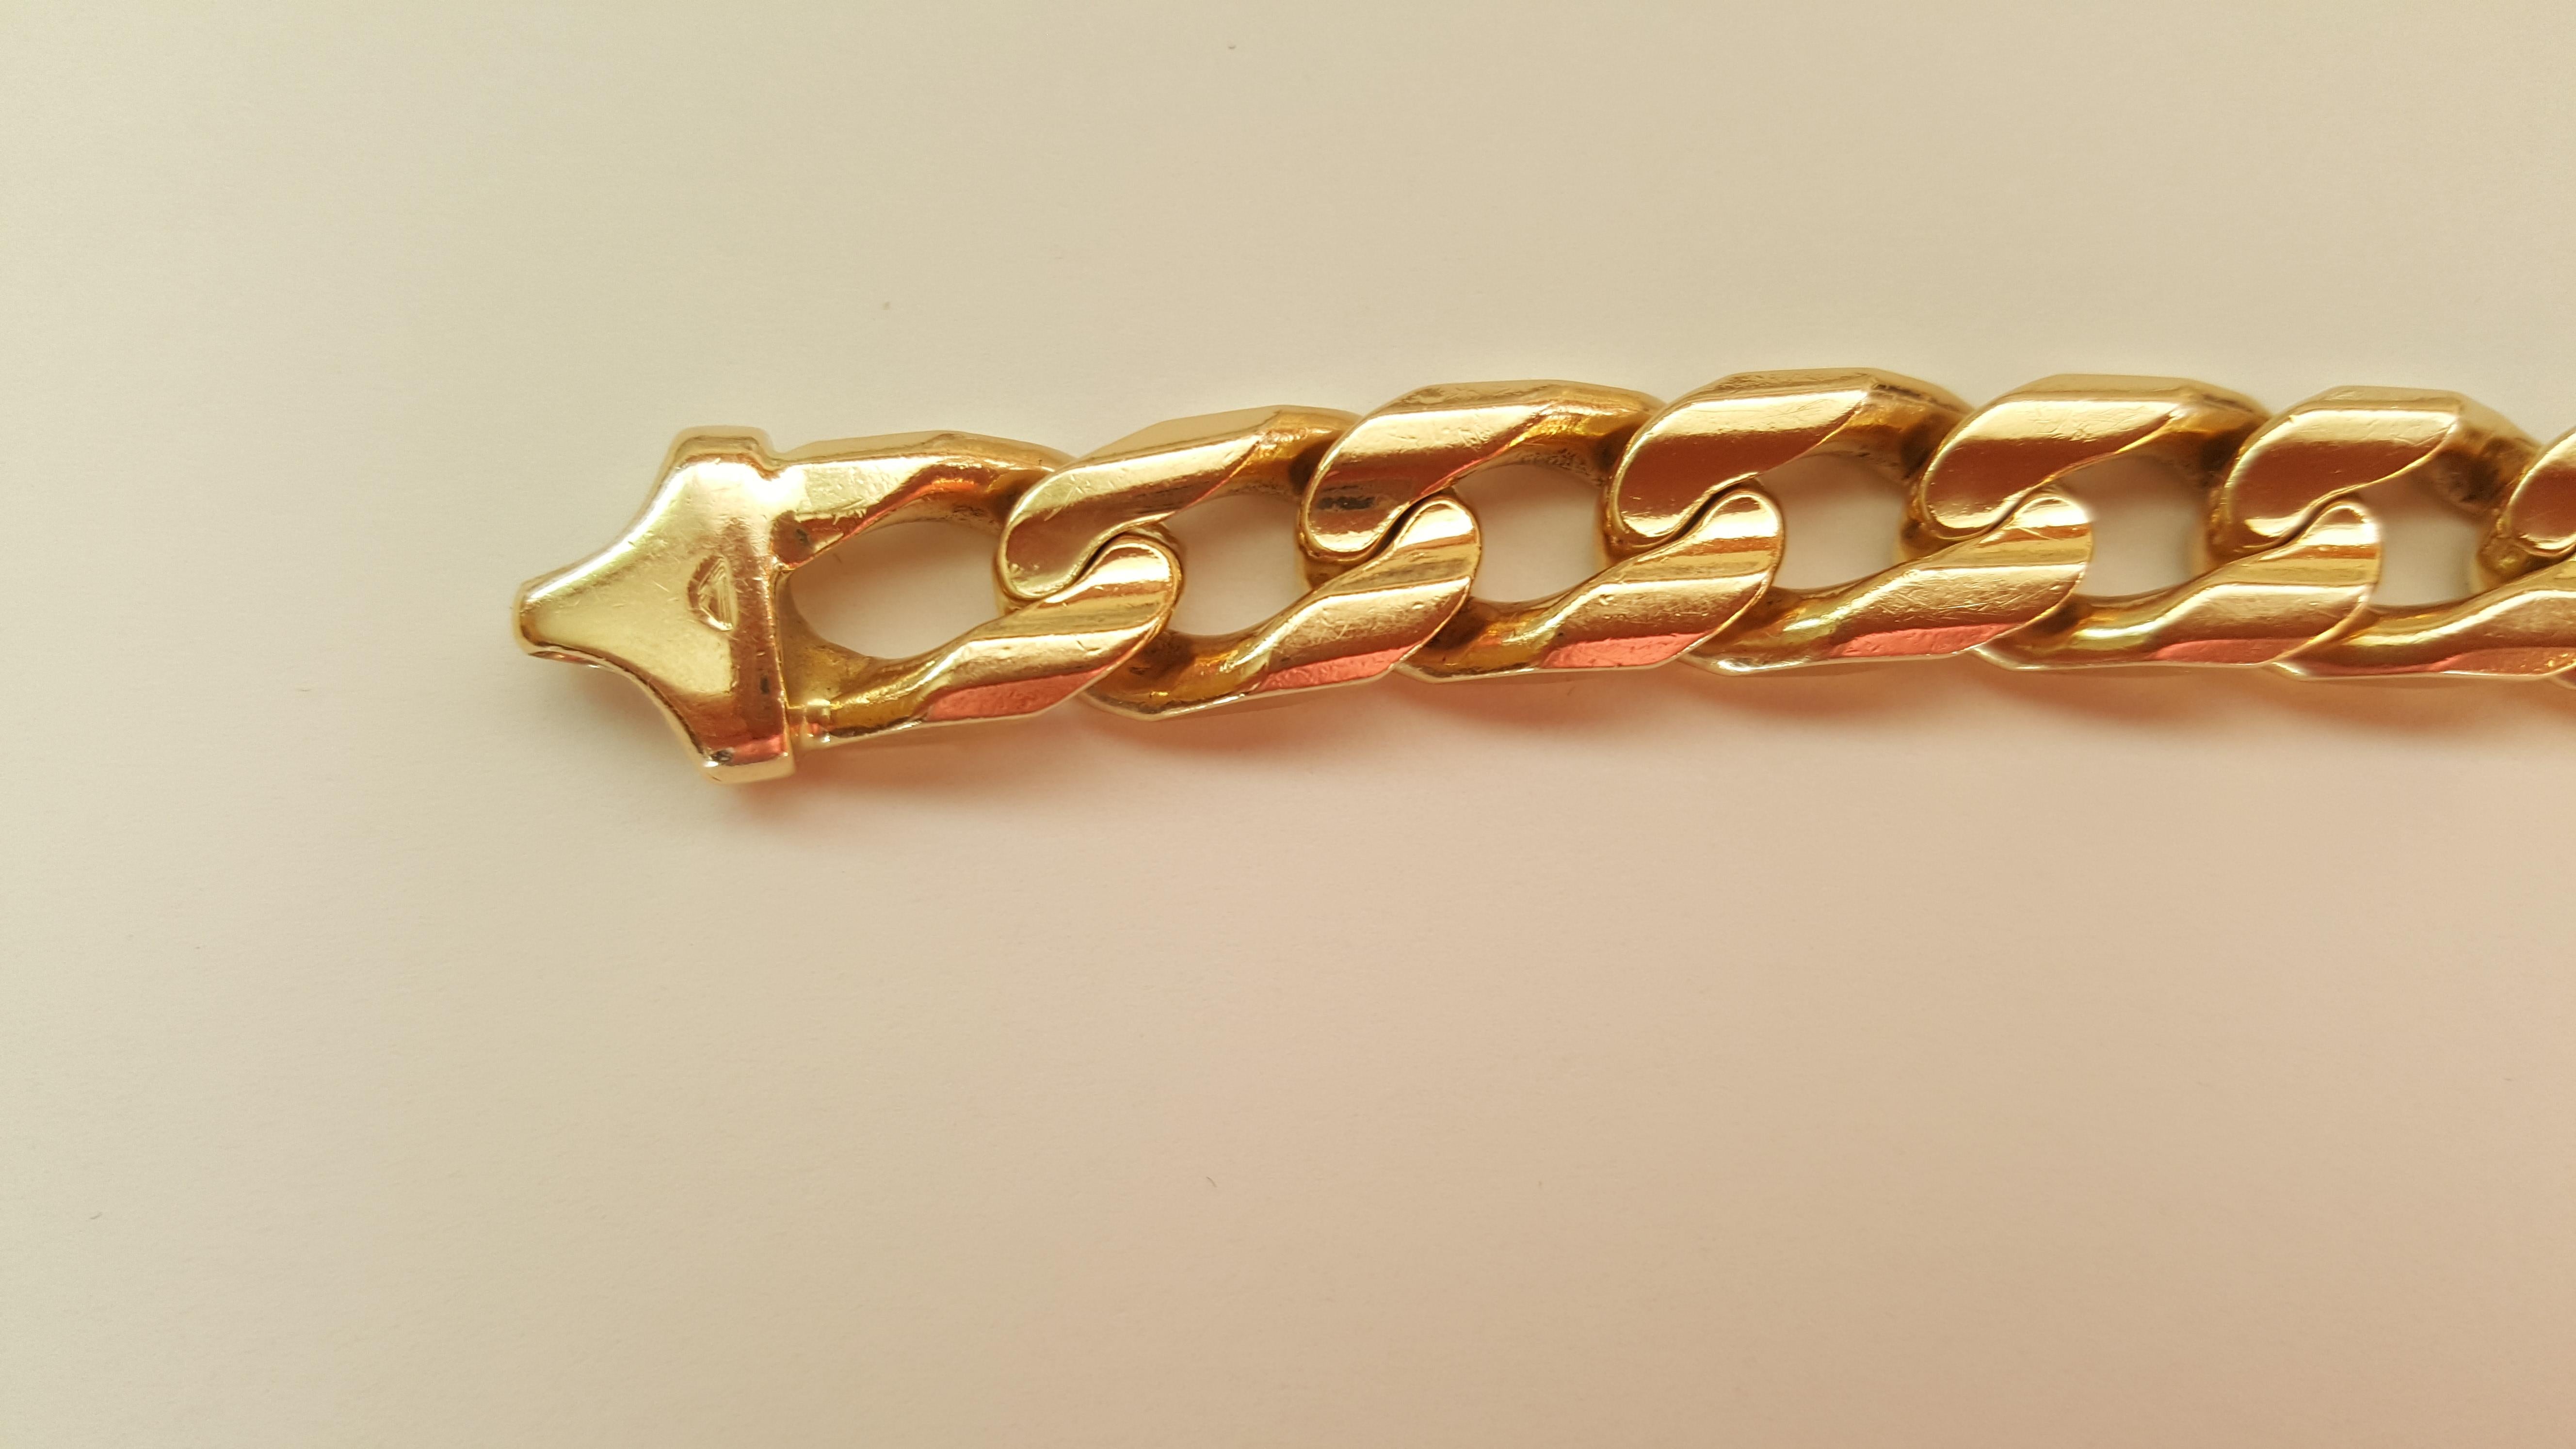 Solid 14kt Yellow Gold Figaro Link Bracelet, Italian, 9.25 Inches, 72.4grams. This bracelet is secured with a lobster clasp, 4mm thick, 11.2mm wide, and stamped 14K Italy. It's in very nice condition and very heavy. Please let us know if you have